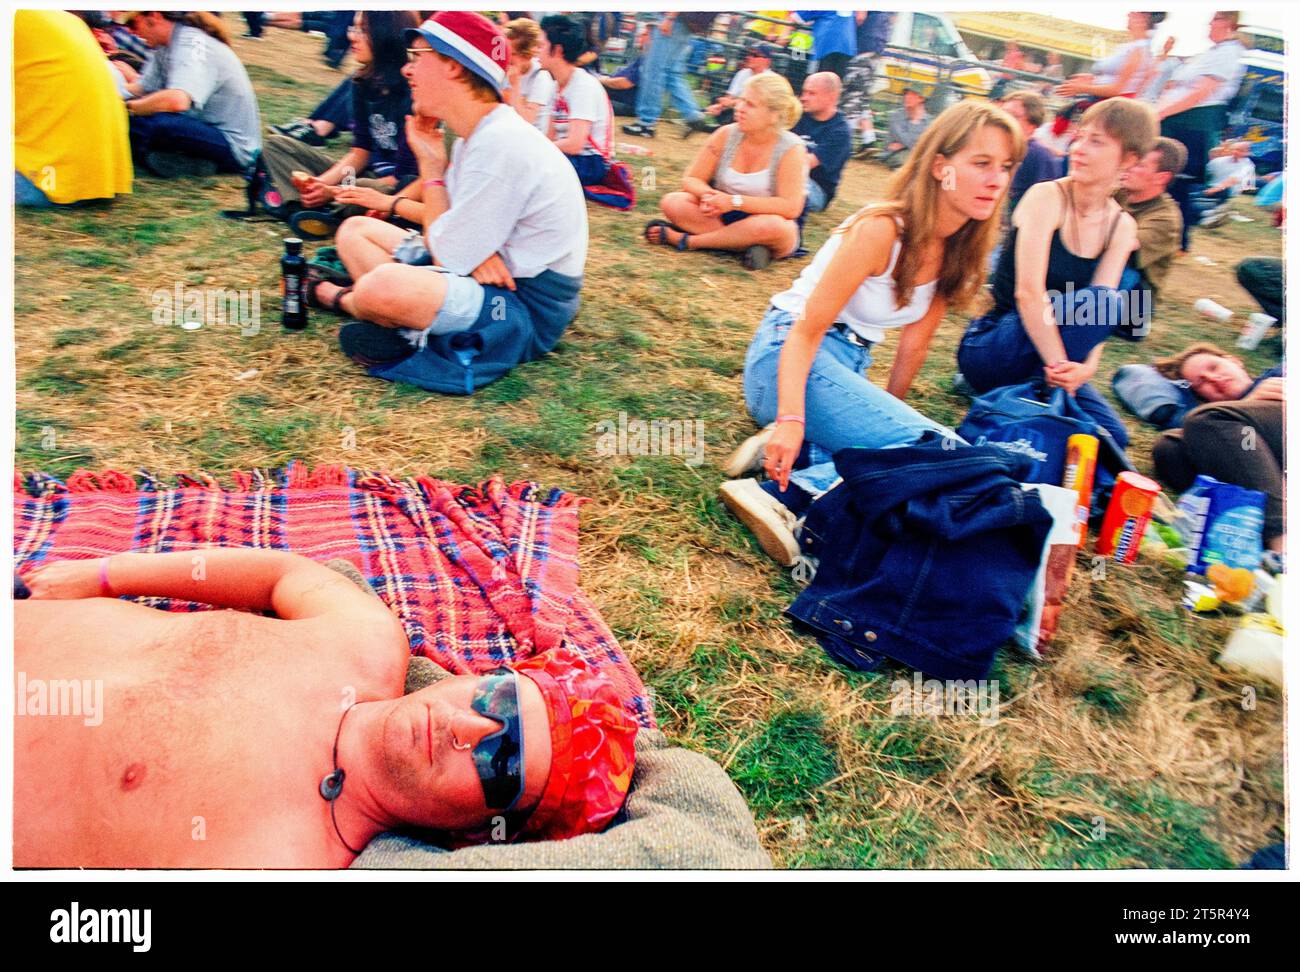 BRITPOP and ROCK FANS, READING FESTIVAL, 1998: A man sunbathes and seems to be getting burned by the main stage. A scene from the site and crowd in the Main Stage arena area at Reading Festival 1998 on 28-30 August 1998 in Reading, England UK. Photo: Rob Watkins Stock Photo